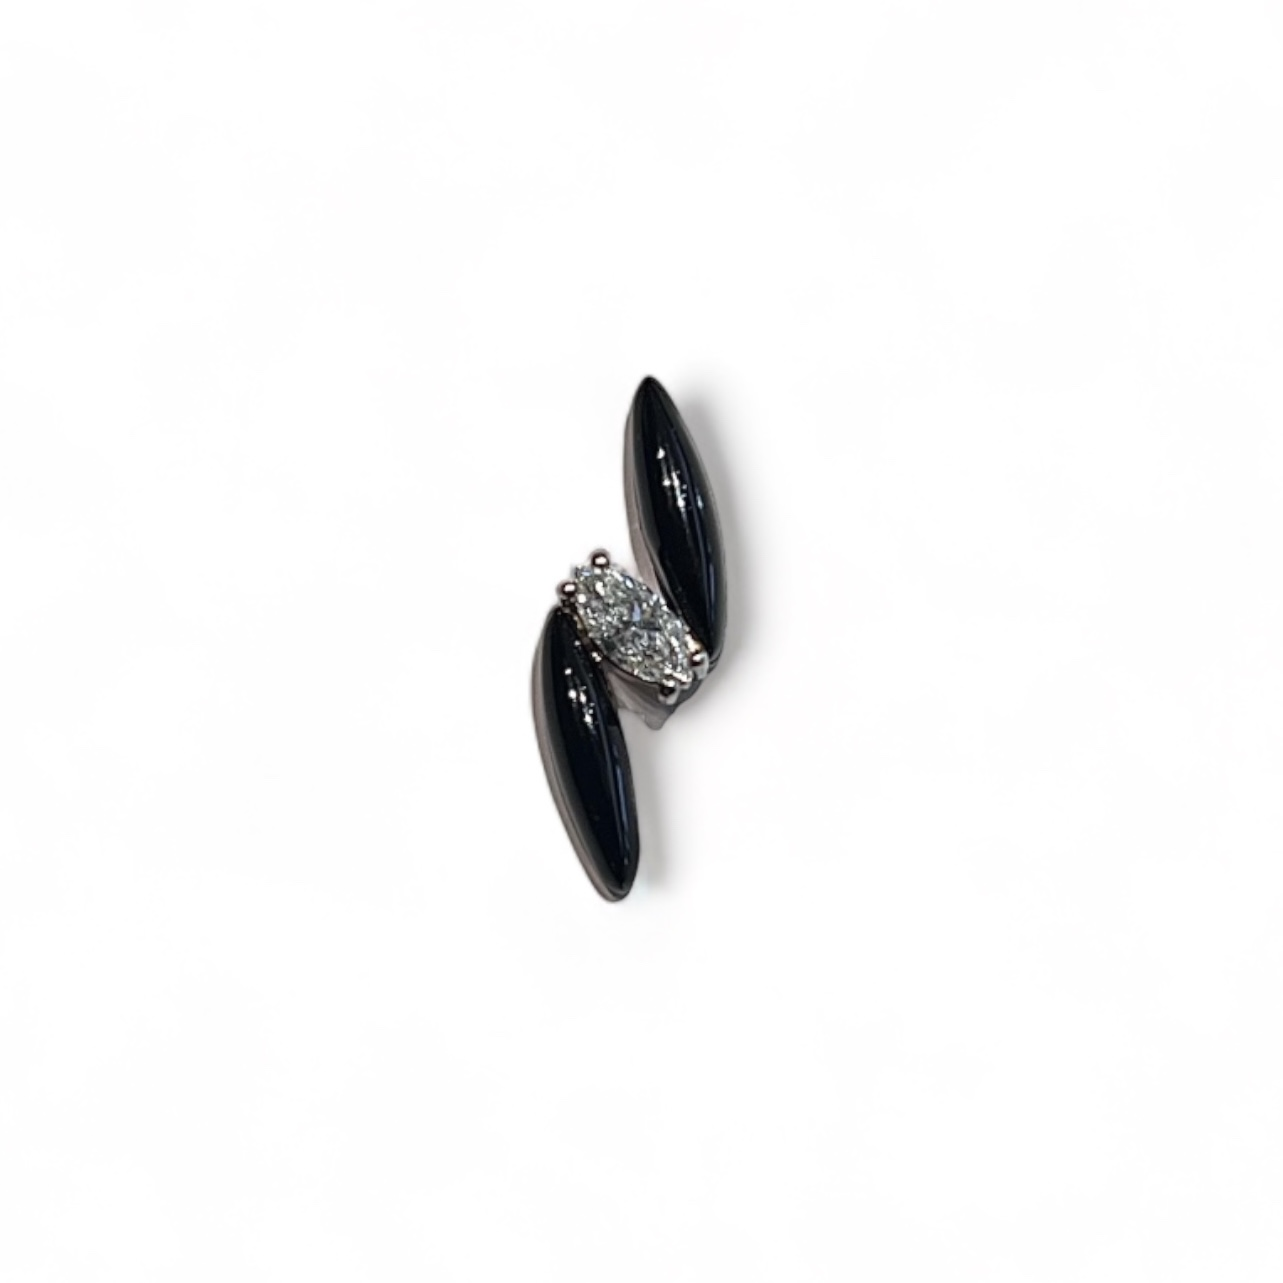 Earring with marquise cut diamond.